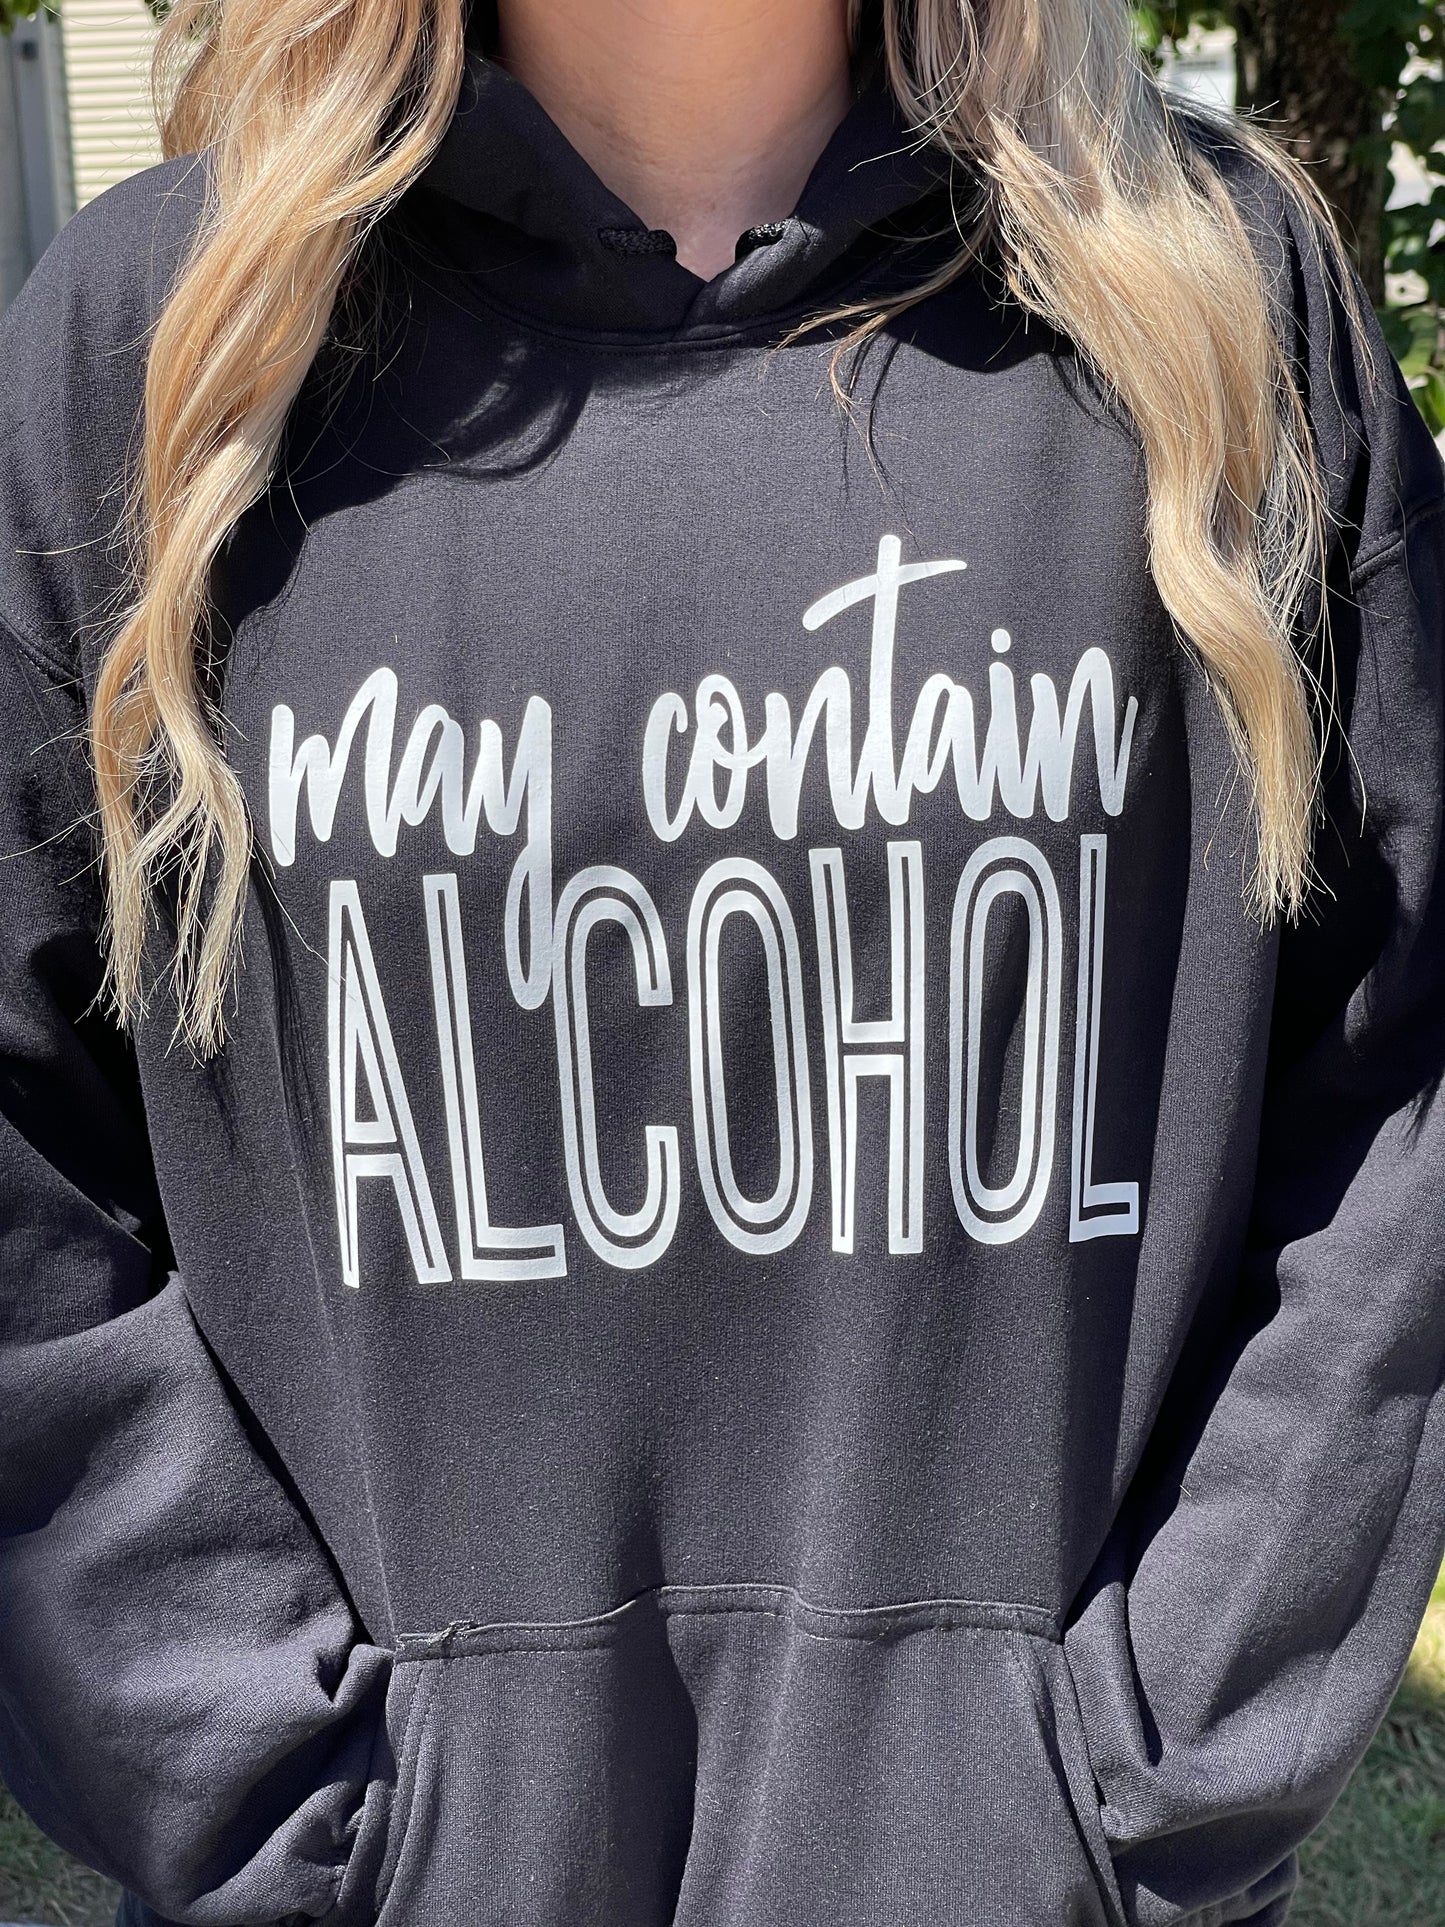 May Contain Alcohol Hoodie